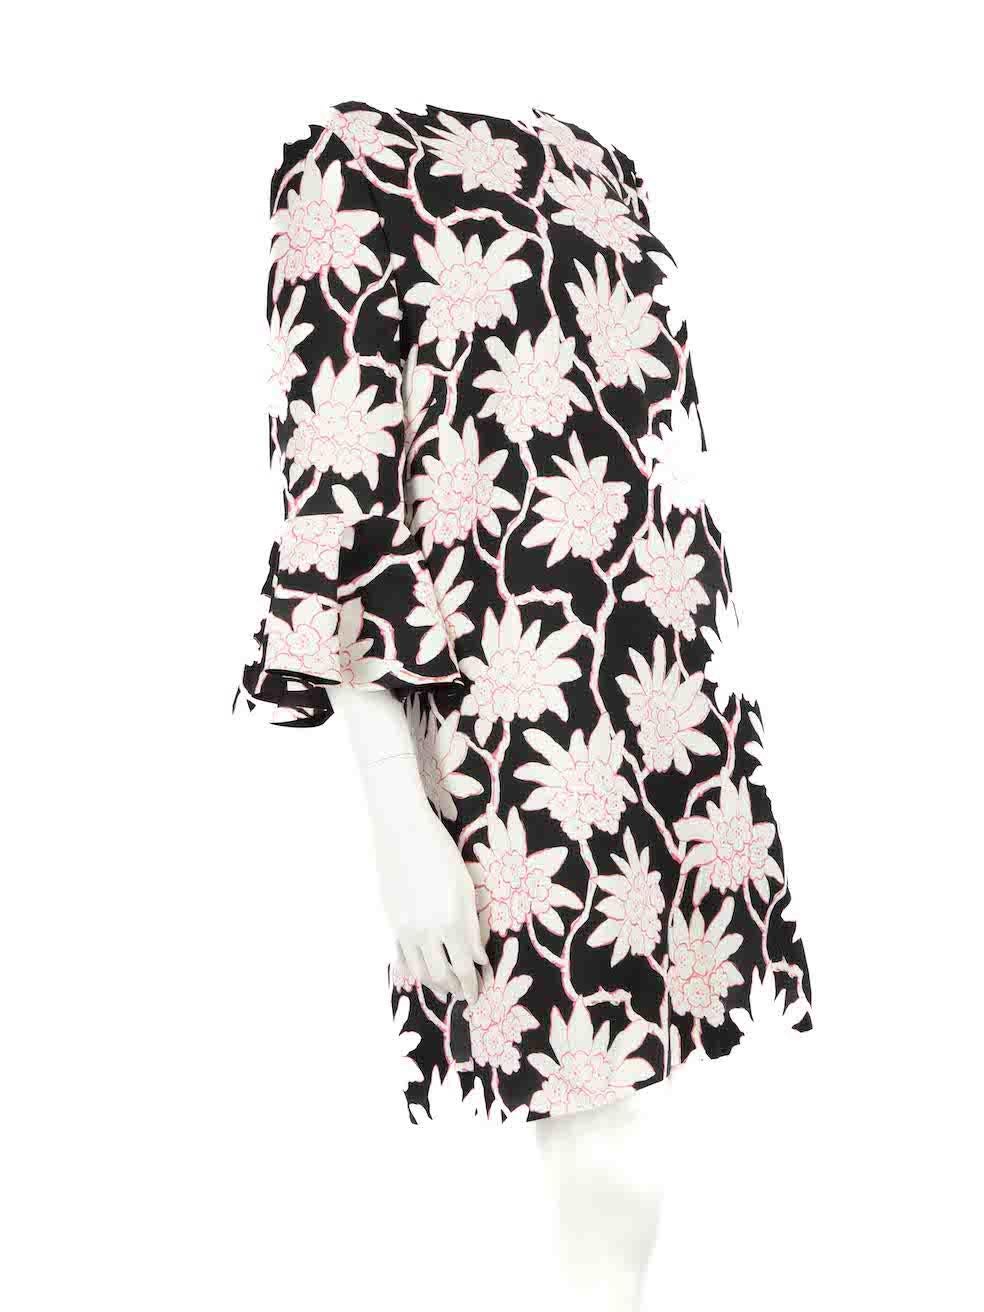 CONDITION is Never worn, with tags. No visible wear to dress is evident on this new Valentino designer resale item.
 
 
 
 Details
 
 
 Black
 
 Wool
 
 Mini dress
 
 Floral print pattern
 
 Round neckline
 
 Mid sleeves with ruffle cuffs
 
 Back